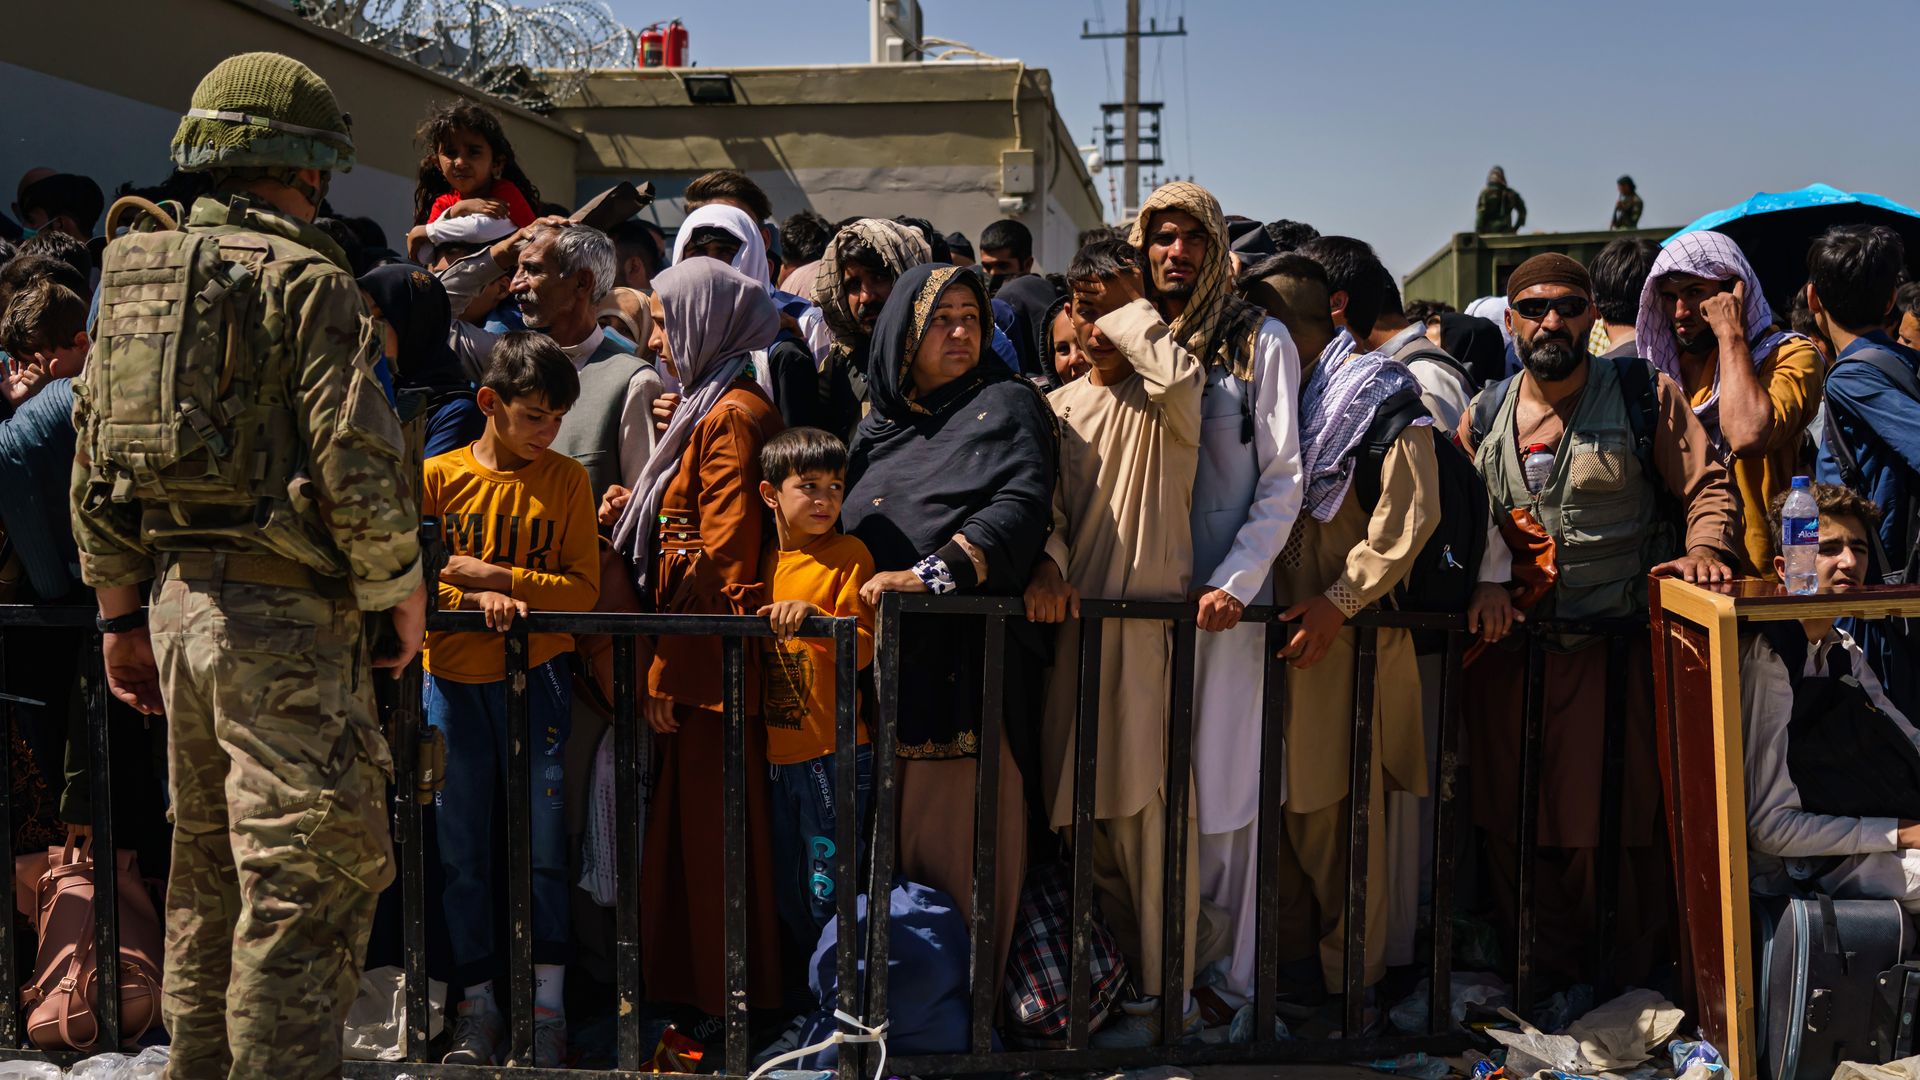  At the intake Abbey Gate, British and American security forces maintain order amongst the Afghan evacuees waiting to leave, in Kabul, Afghanistan